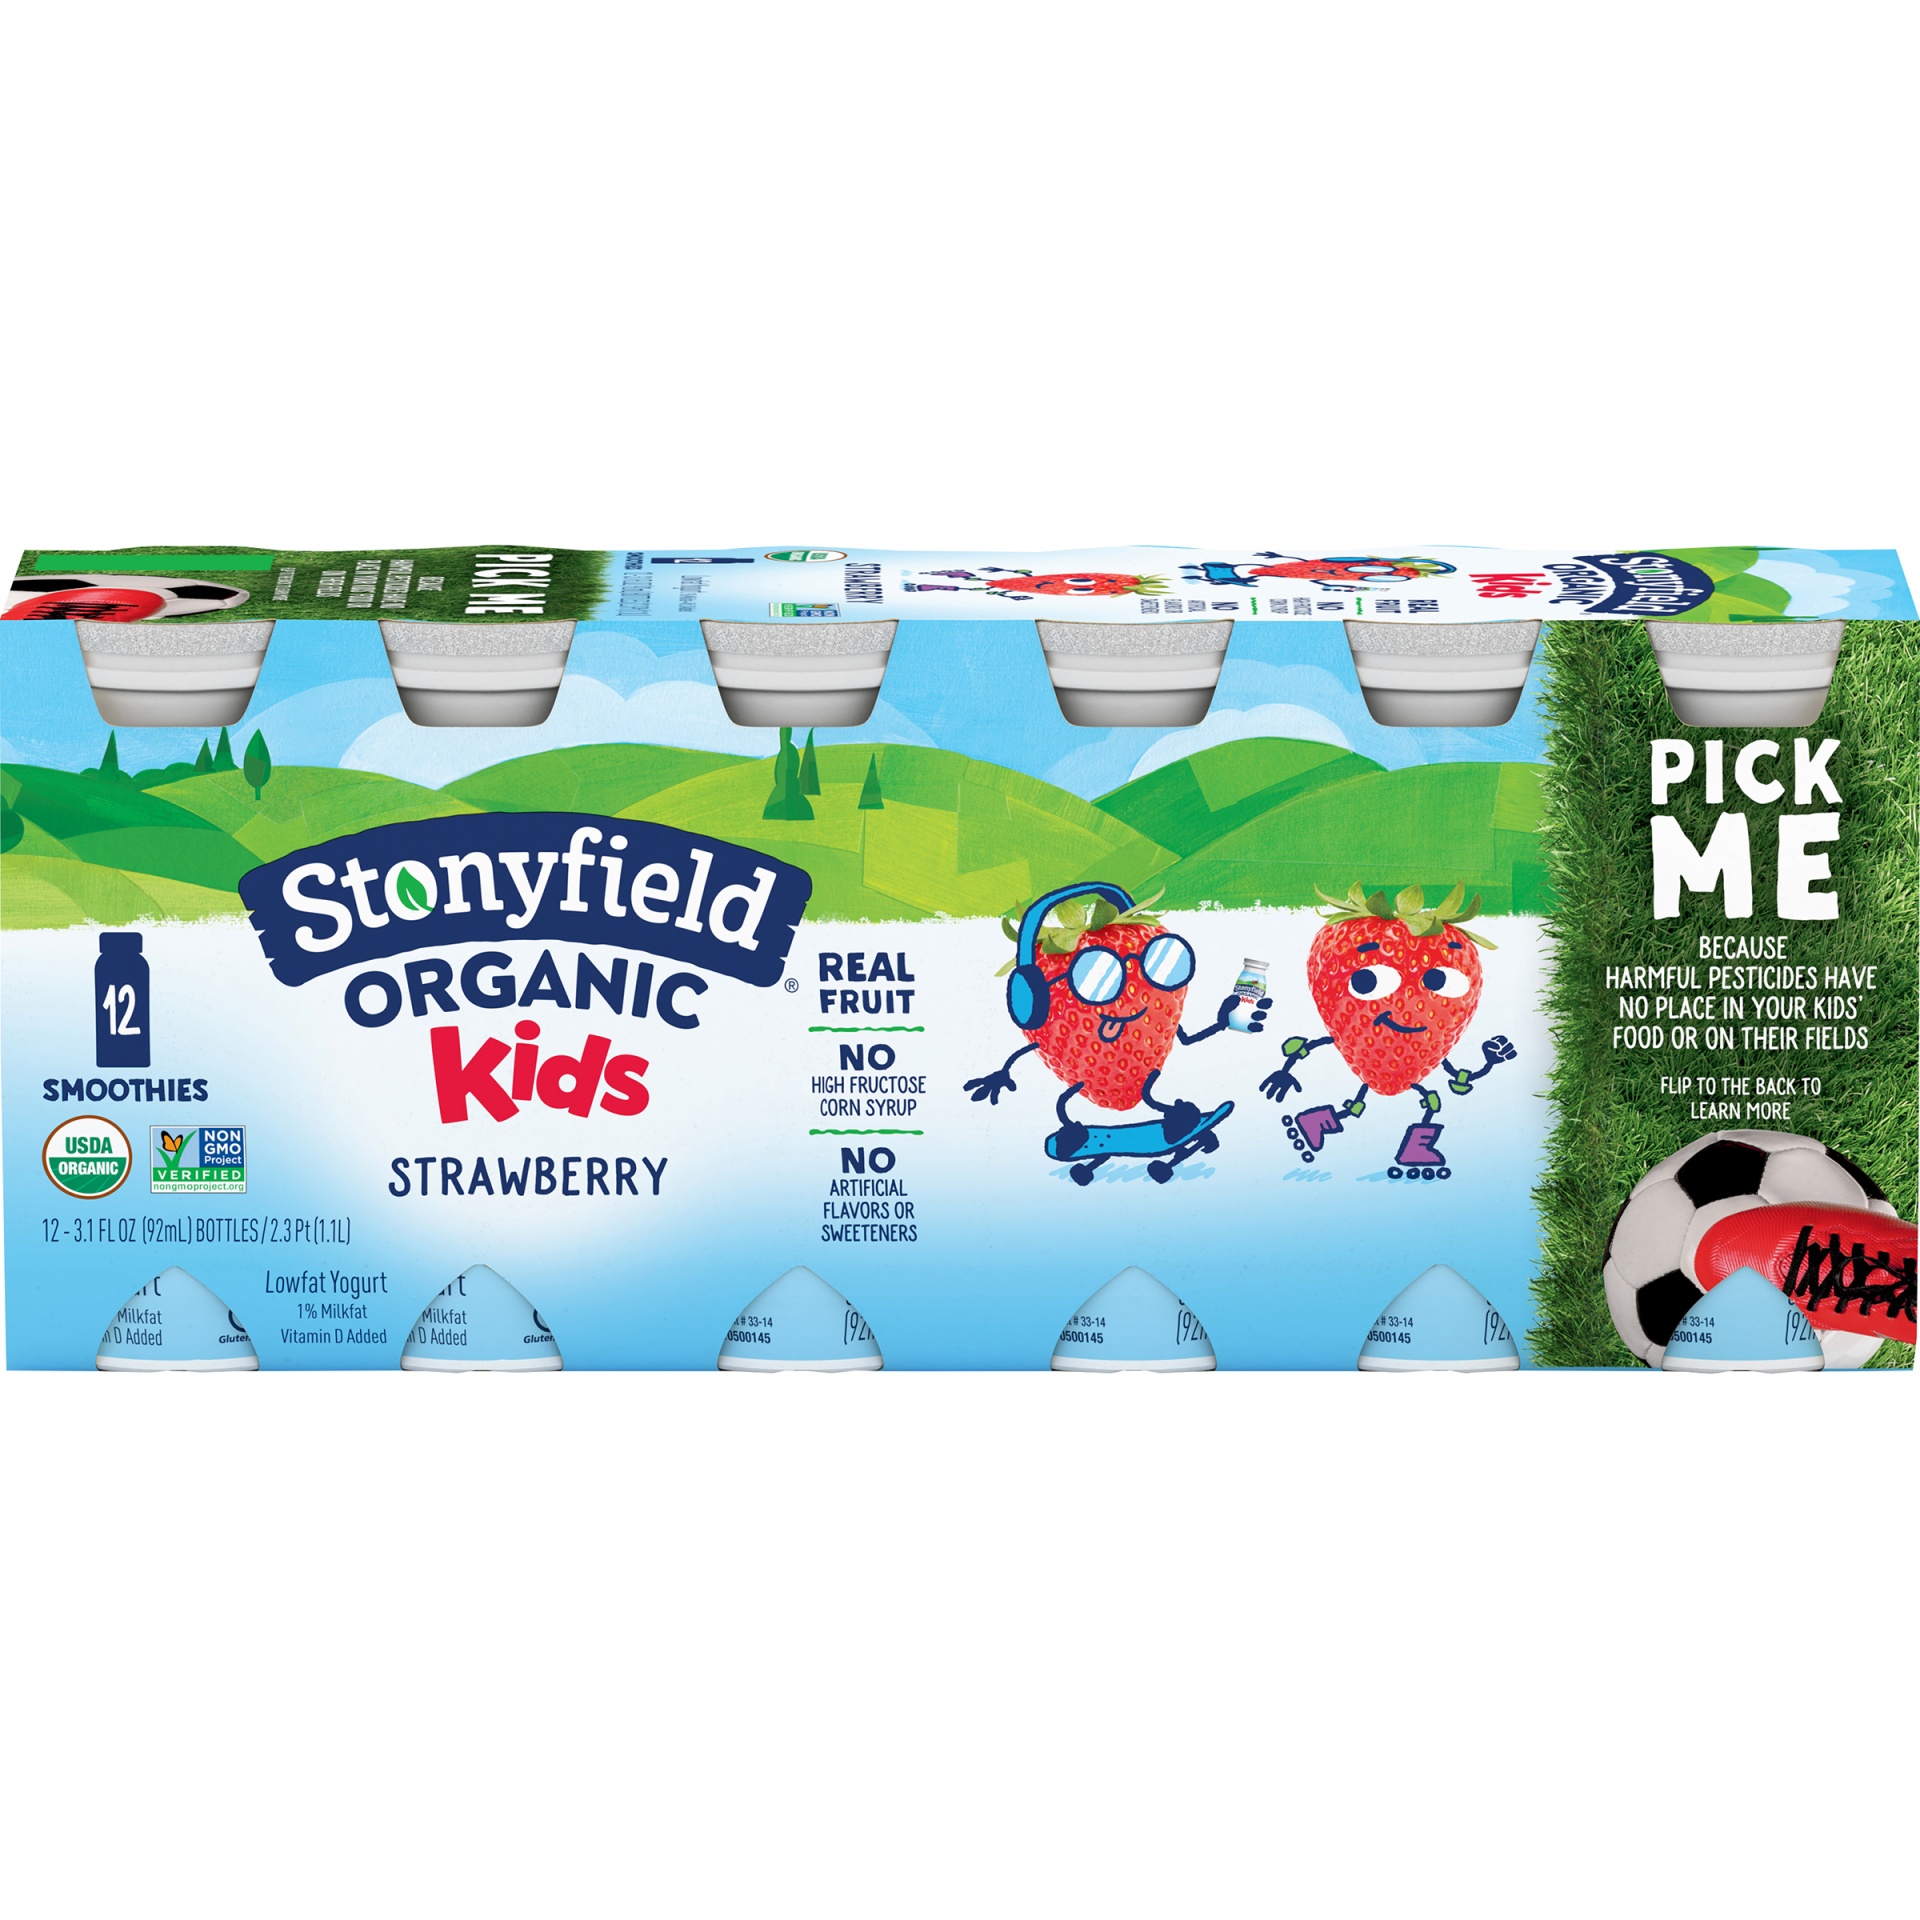 slide 1 of 2, Stonyfield Organic Kids Lowfat Yogurt Smoothies are the perfect handheld snack for busy kids. Stash in your child's lunch box, or in your car cooler during road trips. These low fat smoothies are made with wholesome ingredients without artificial flavors, sweeteners or high fructose corn syrup. With vitamin D and calcium to support the growth and maintenance of healthy bones. The result? A delicious and nutritious snack that you can feel good about. Like all Stonyfield Organic products, these are made without the use of toxic persistent pesticides or genetically modified organisms (GMOs), protecting growing kids and contributing to a healthy and sustainable world. Try our full line of products for babies, kids and adults,  including yogurt cups, yogurt pouches, multi-serving yogurt containers, dairy free smoothie pouches, drinkable yogurt, yogurt tubes and more. With fresh taste, high quality ingredients, and no added nonsense, Stonyfield Organic Smoothies for kids are #goodonpurpose!, 